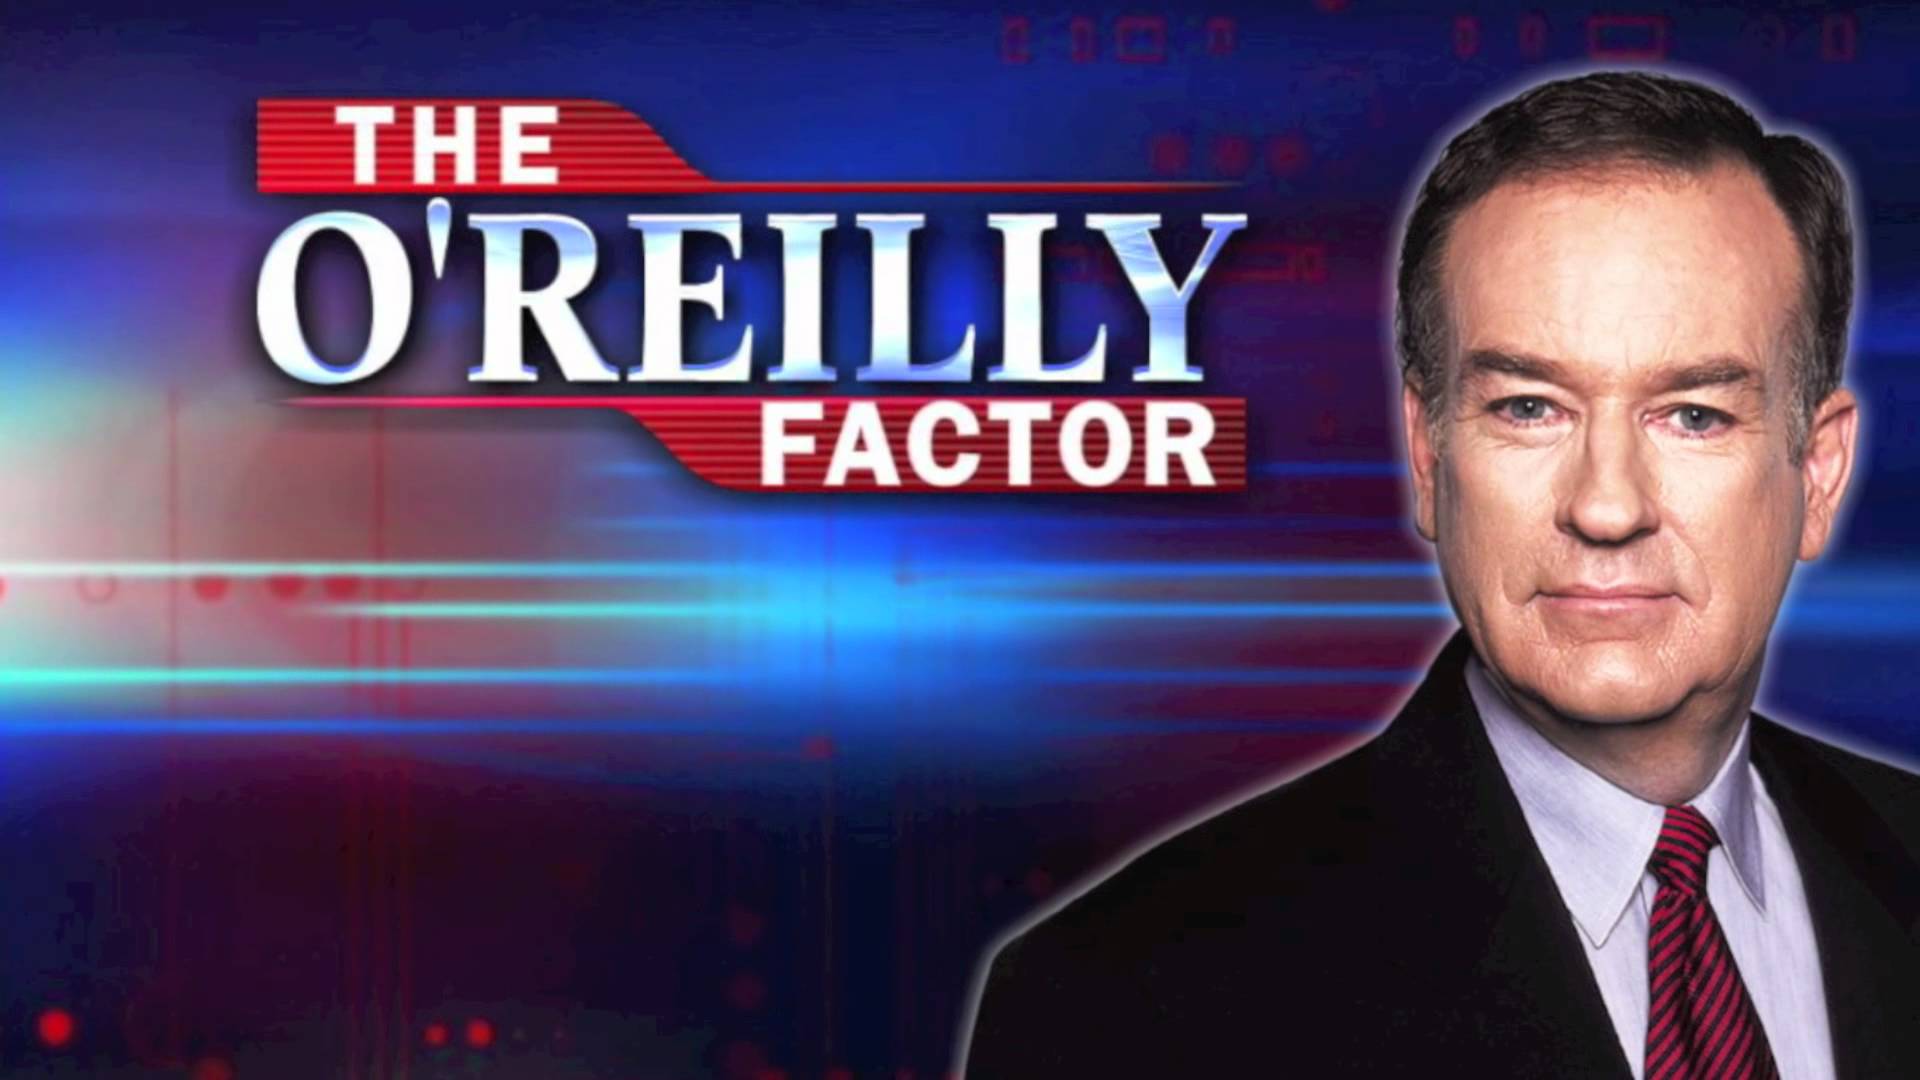 Sexual harassment At Fox News: O'Reilly Factor Loses Viewers Without